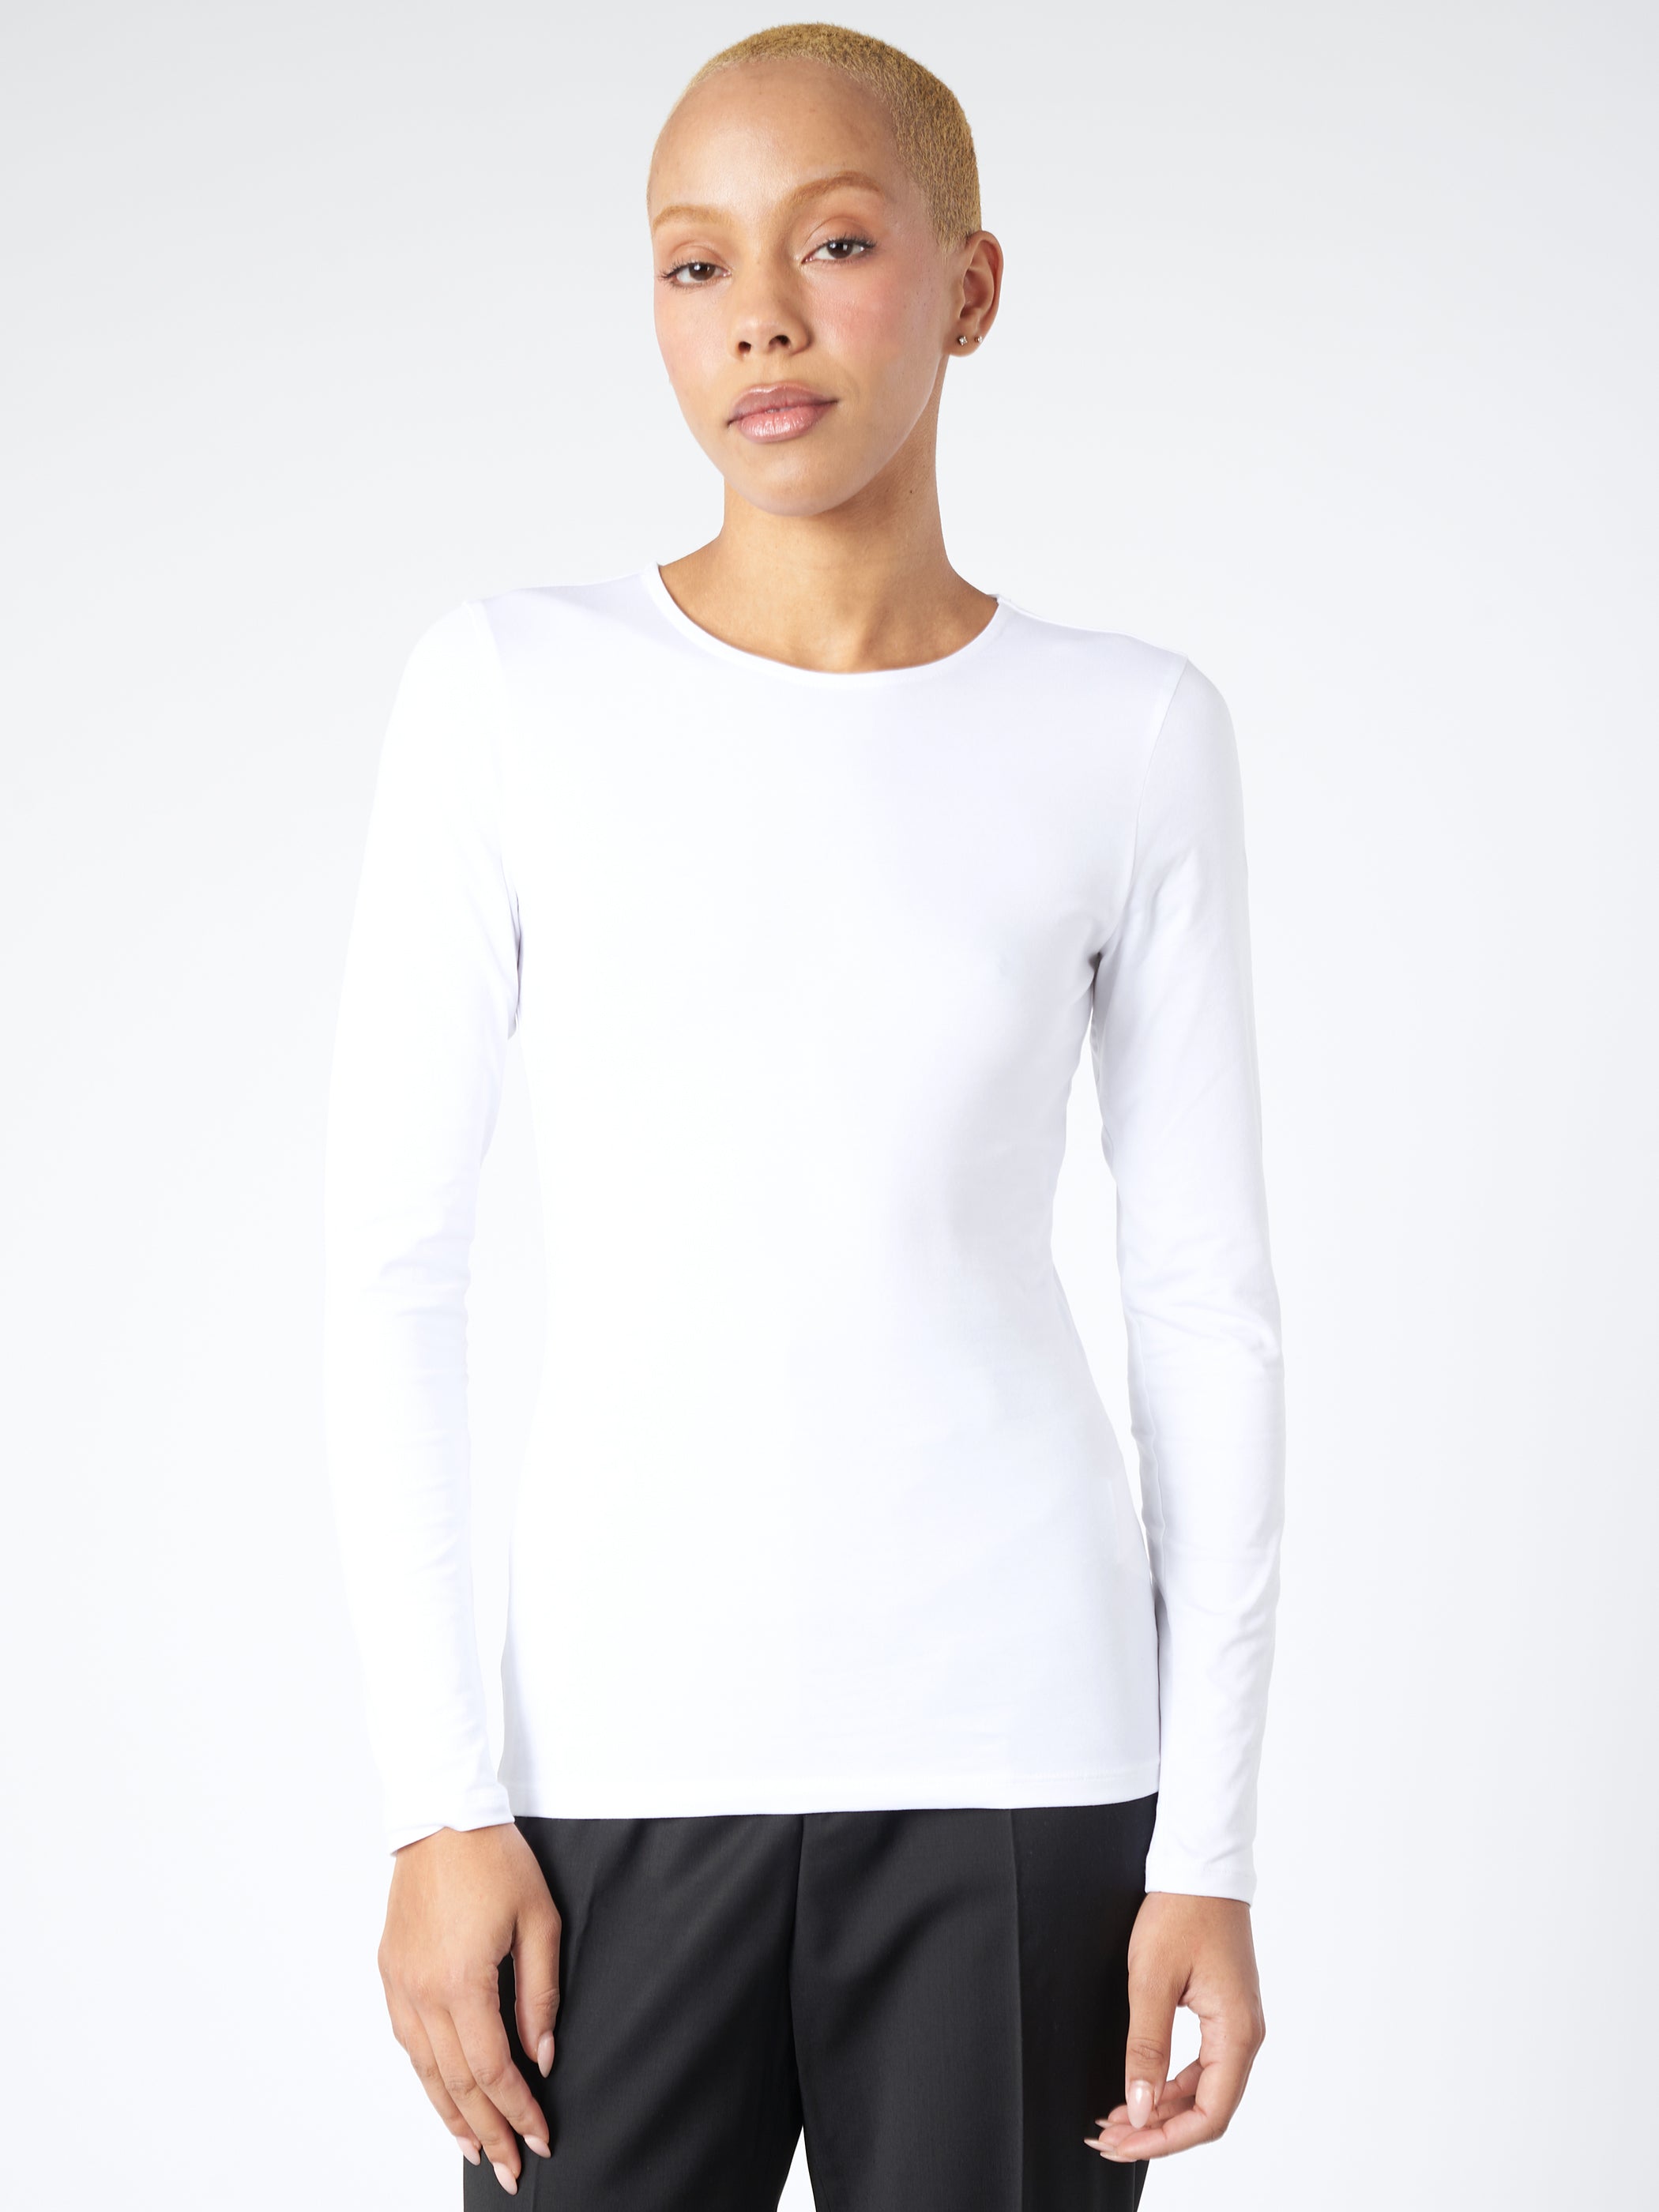 Cotton Stretch Long Sleeve